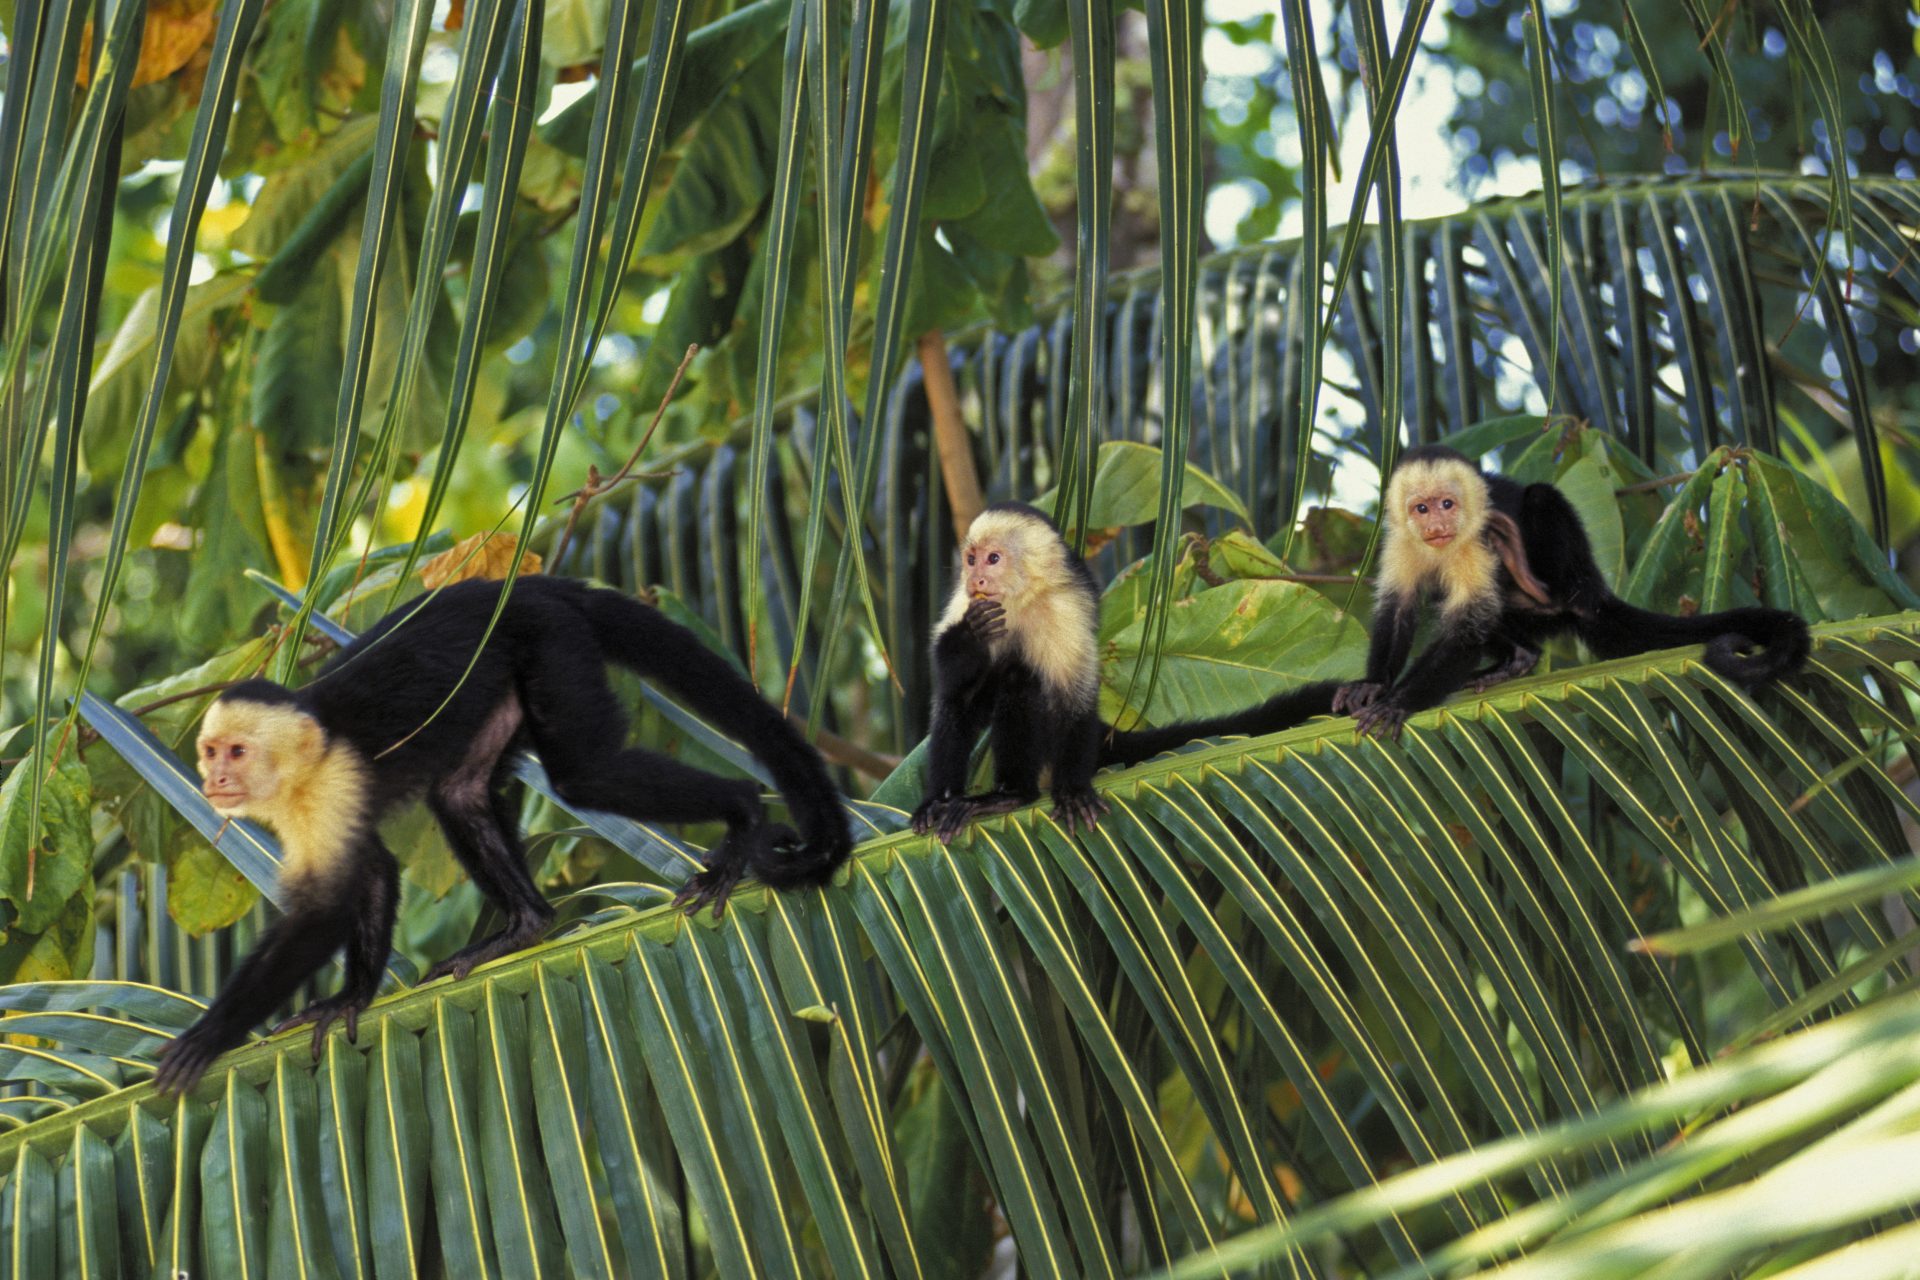 Scientists introduced money to monkeys: This is what they learned